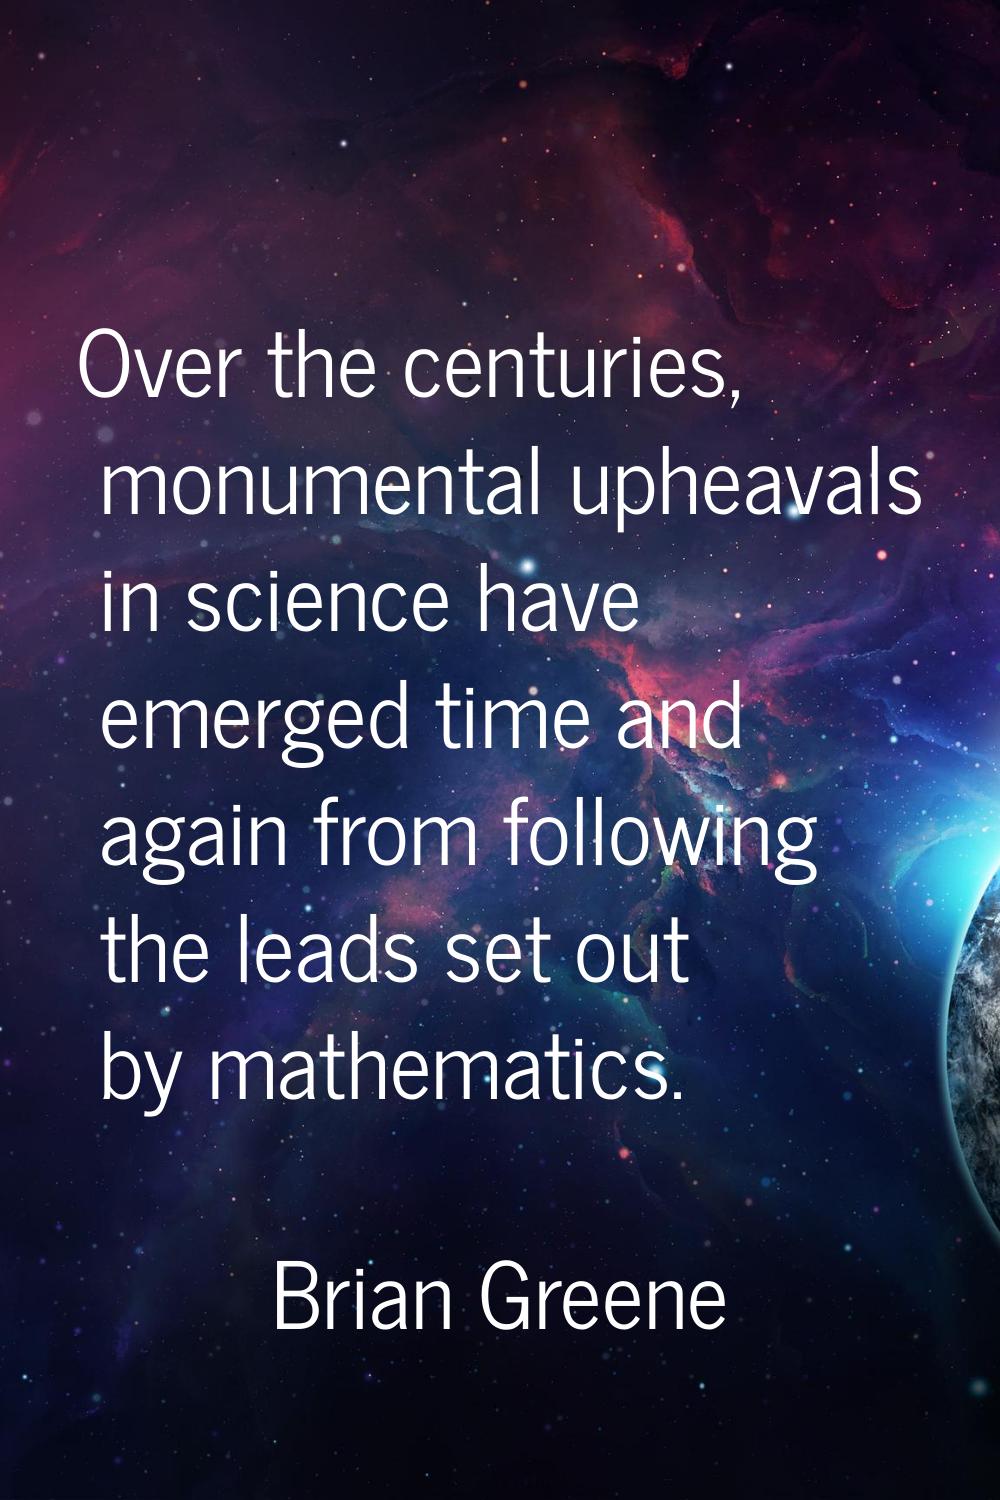 Over the centuries, monumental upheavals in science have emerged time and again from following the 